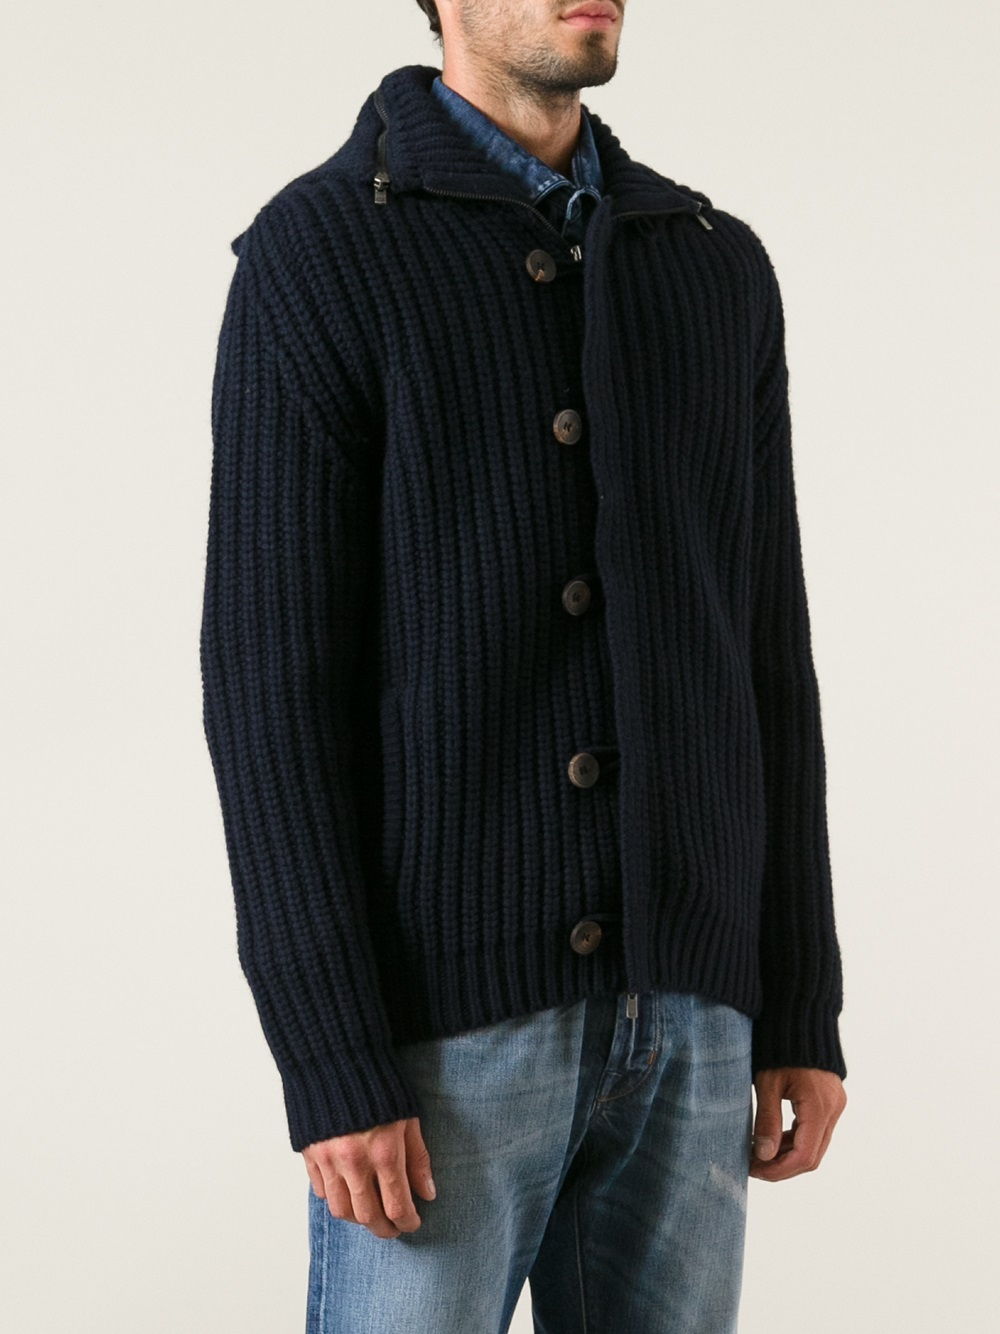 Lyst - Jacob Cohen Chunky Knit Cardigan in Blue for Men